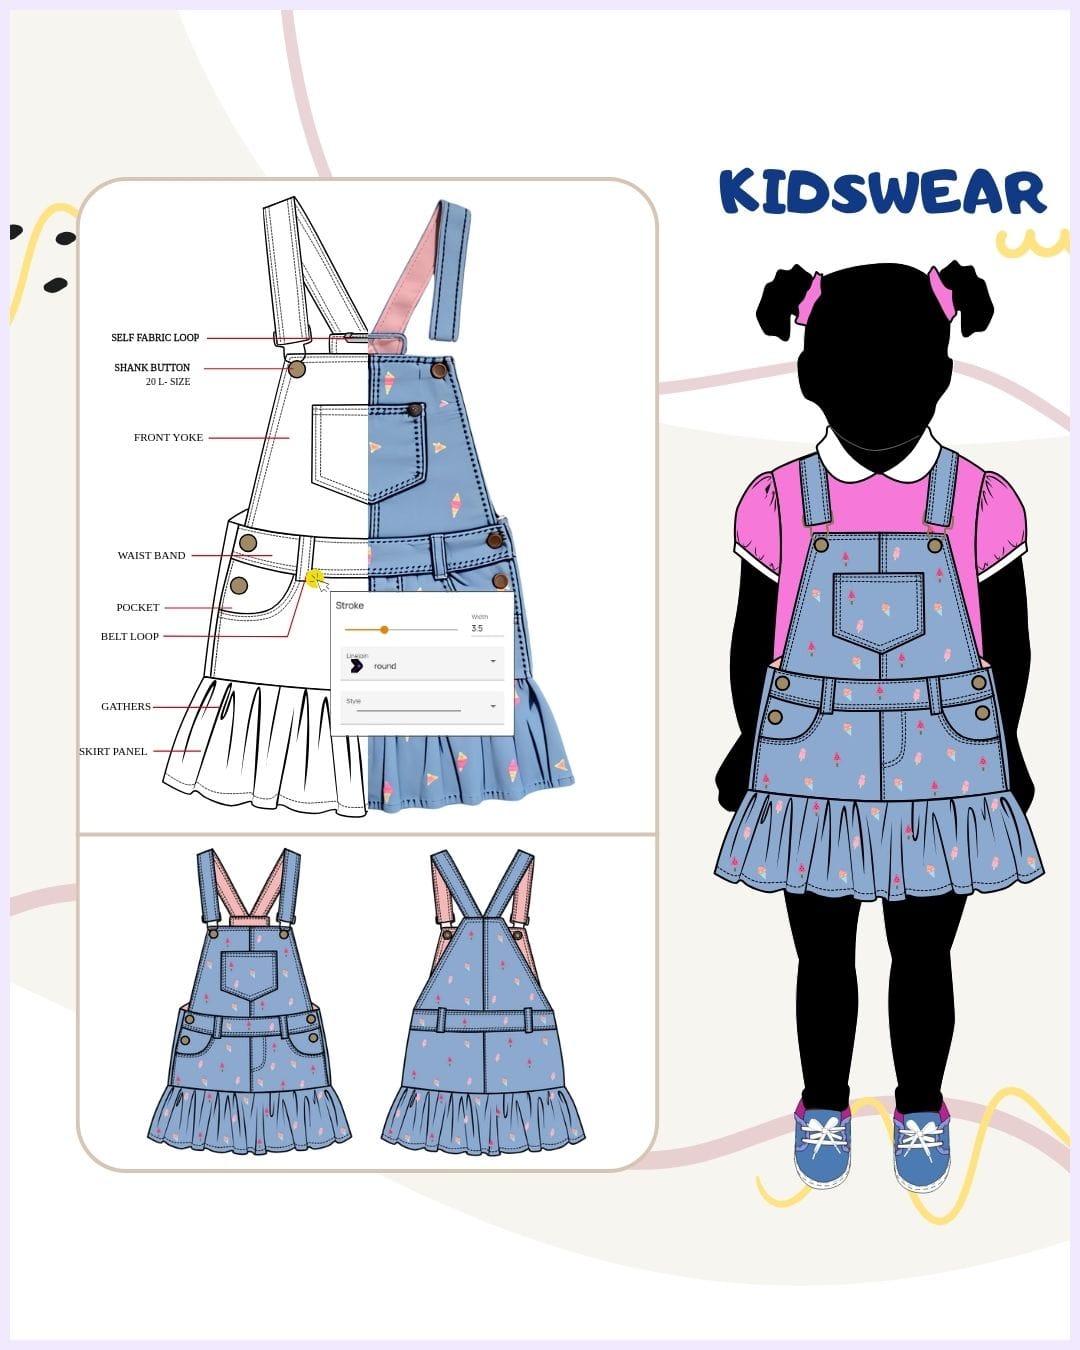 Types of Kidswear Graphic